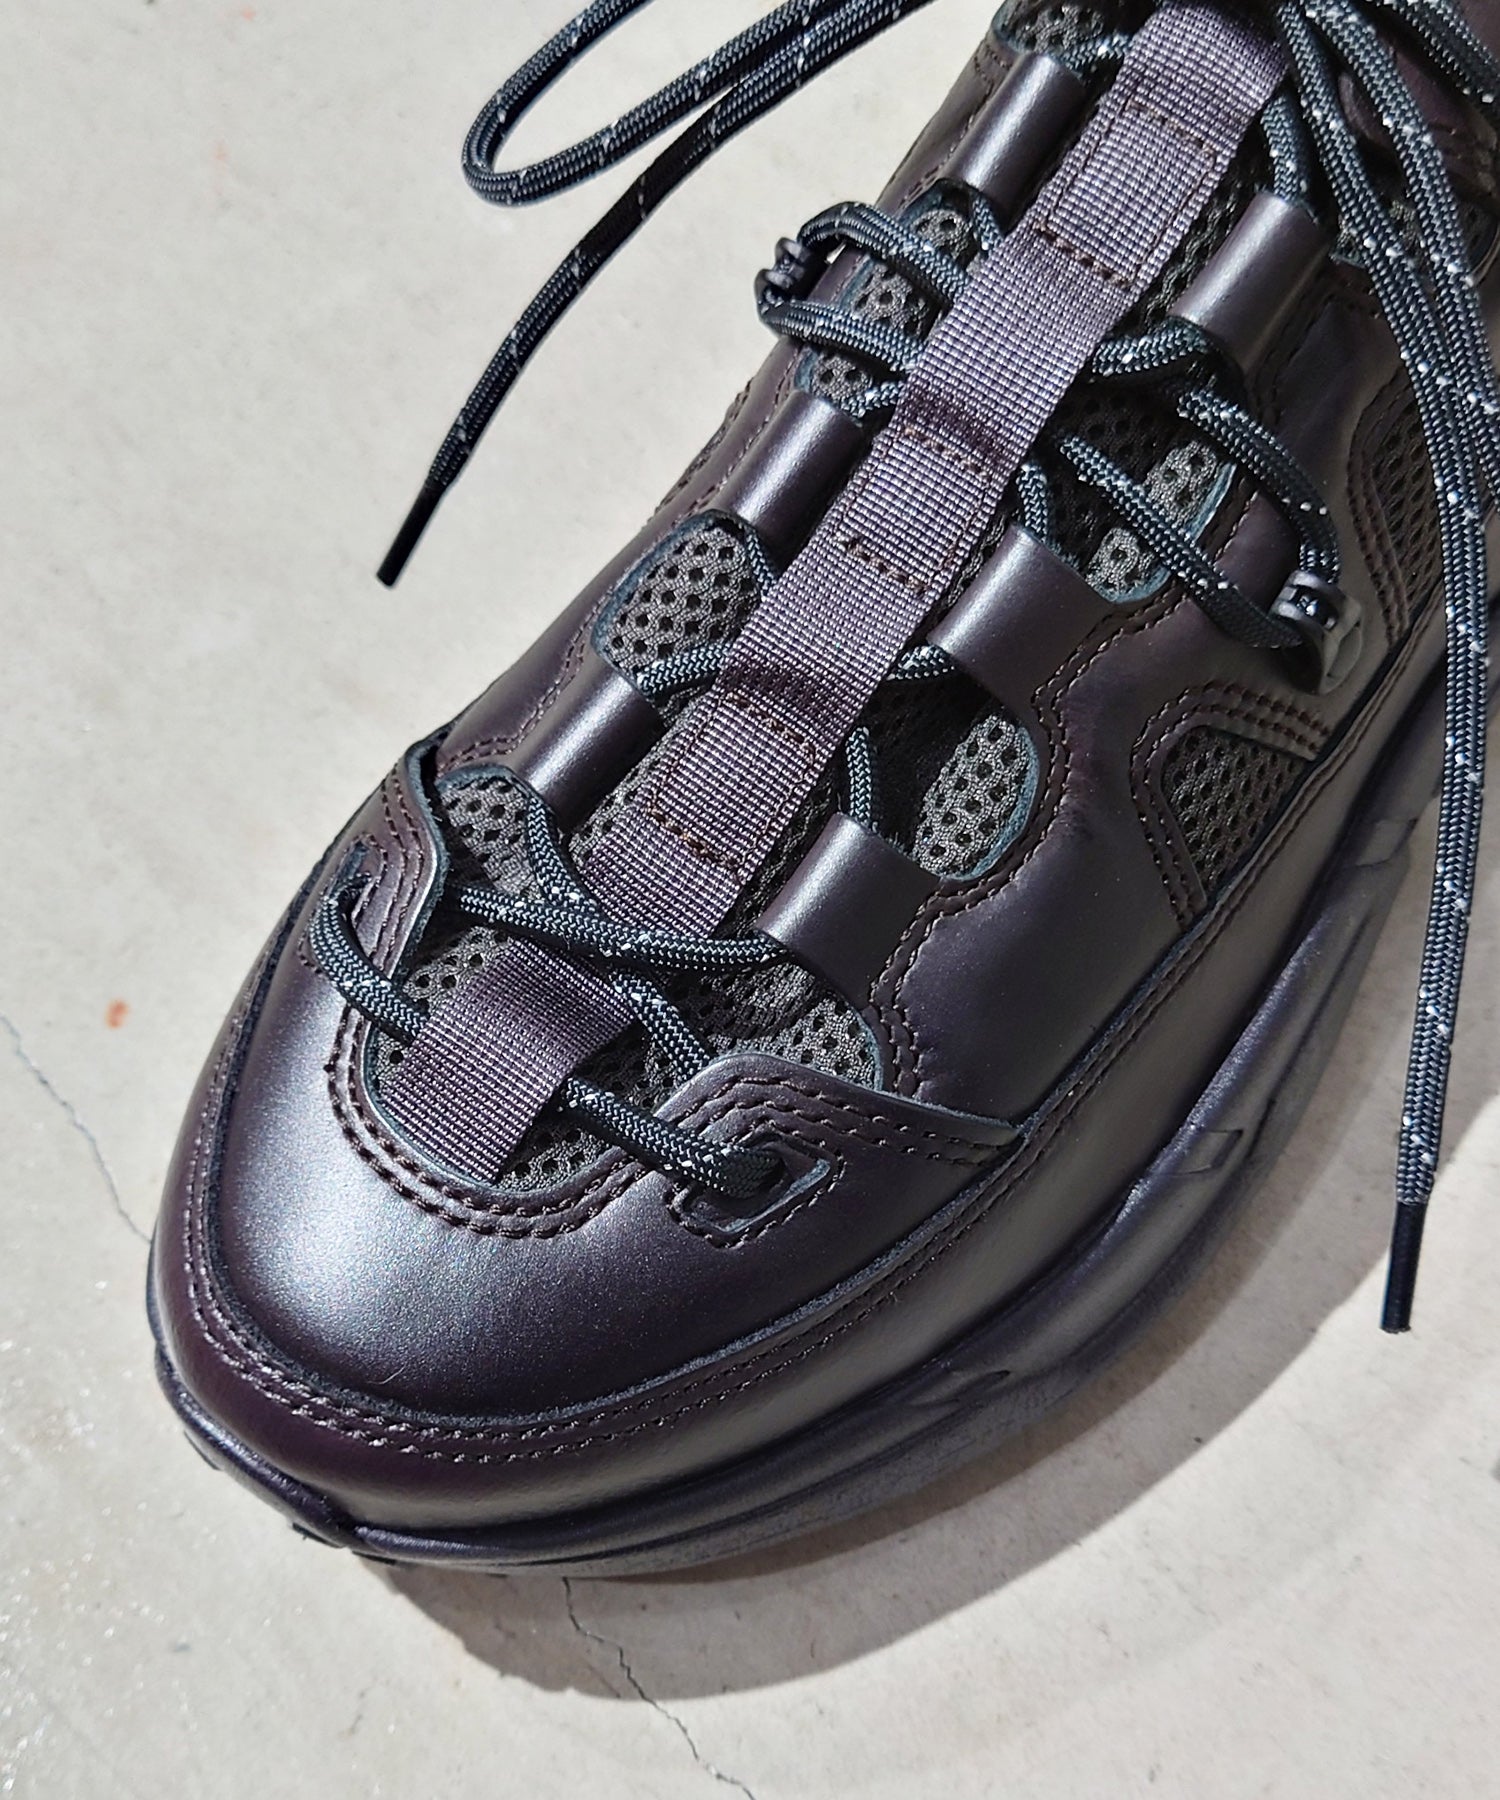 【SPECIAL SHOES FACTORY COLLABORATION】Vibram Sole Lace-Up Sneaker Made In TOKYO